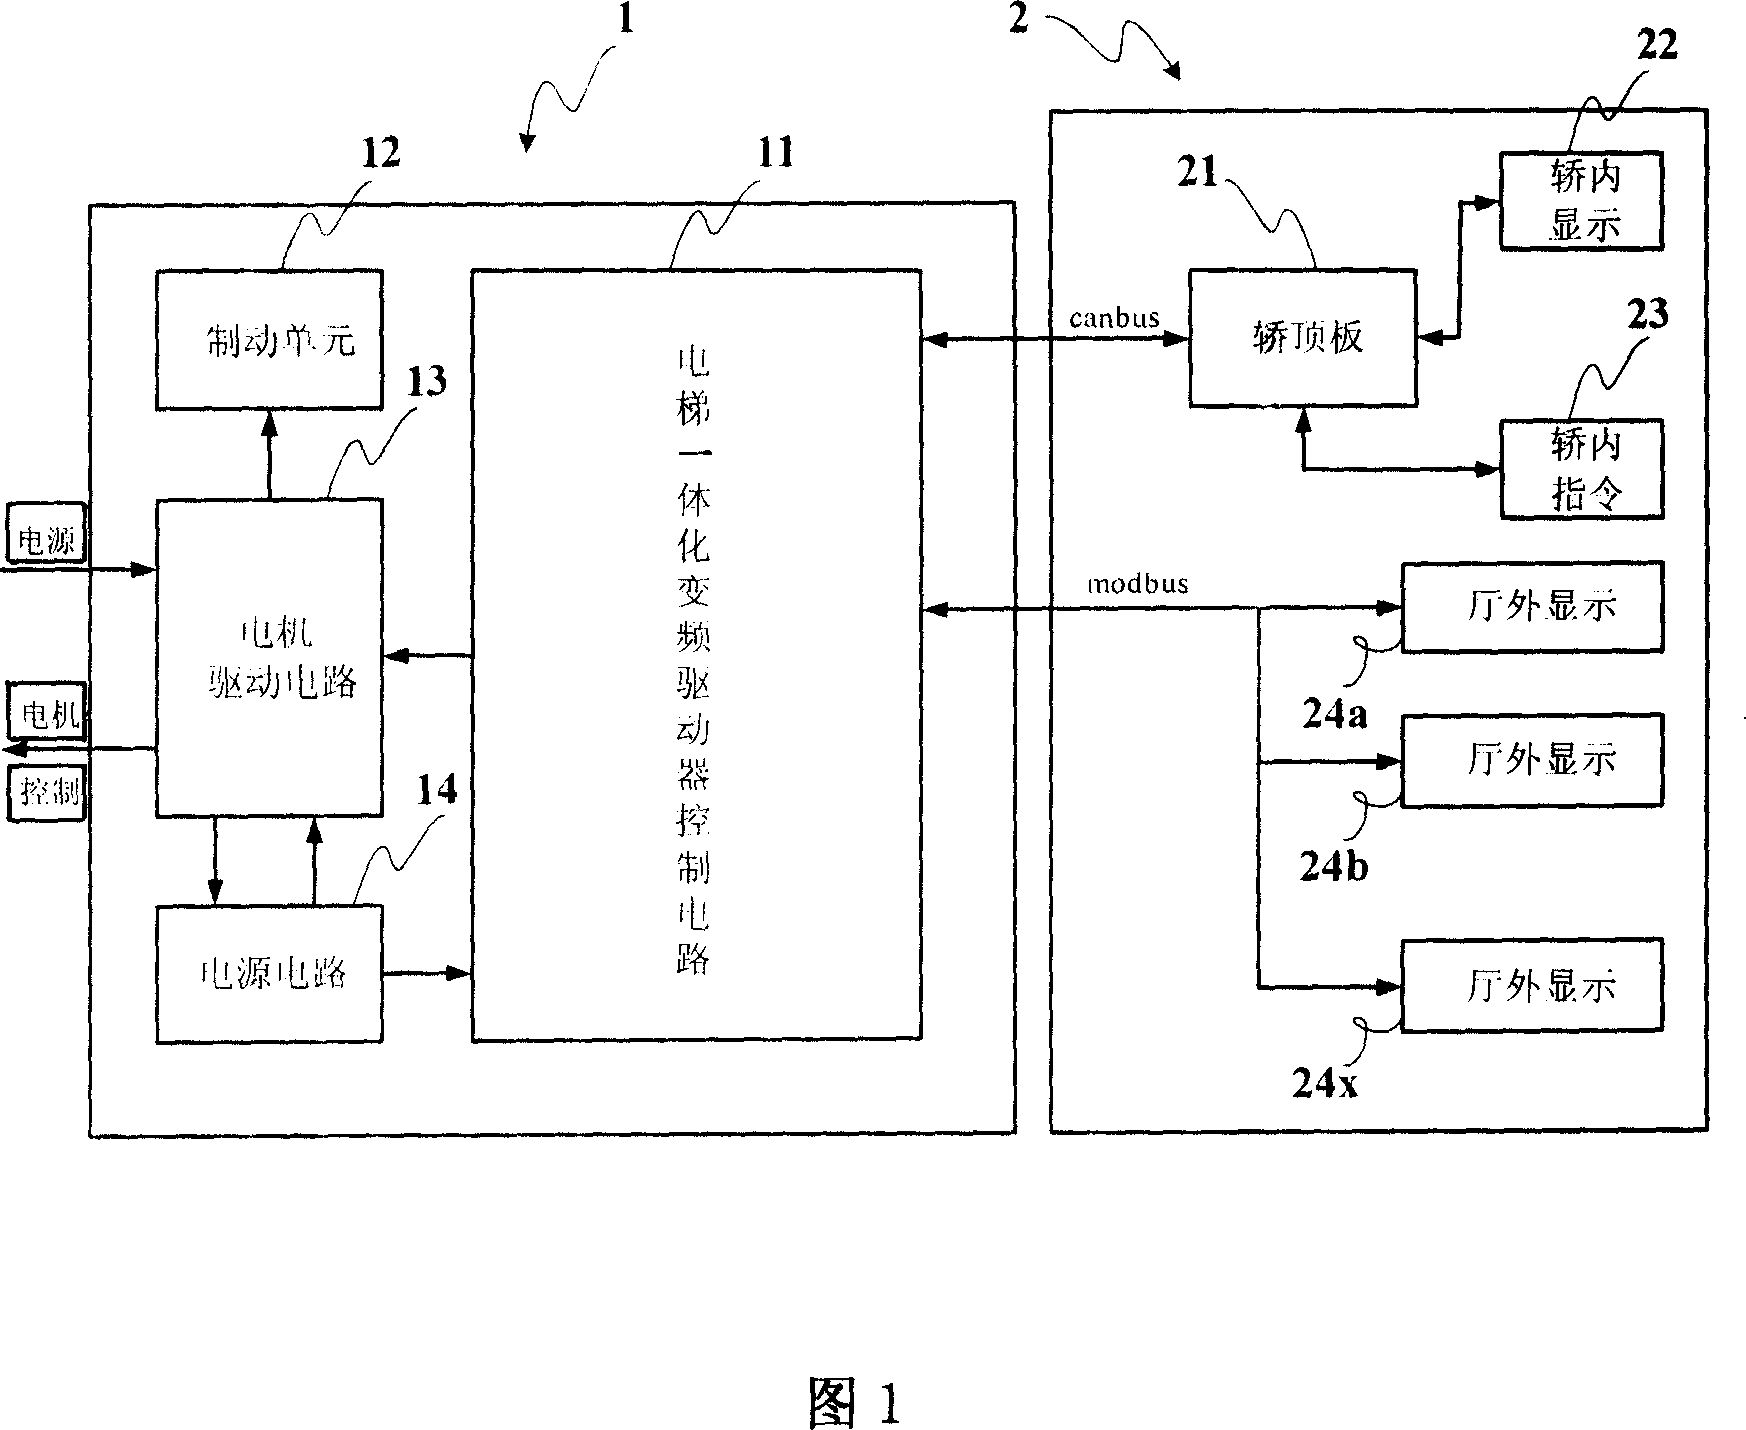 Integral frequency conversion controller for elevator